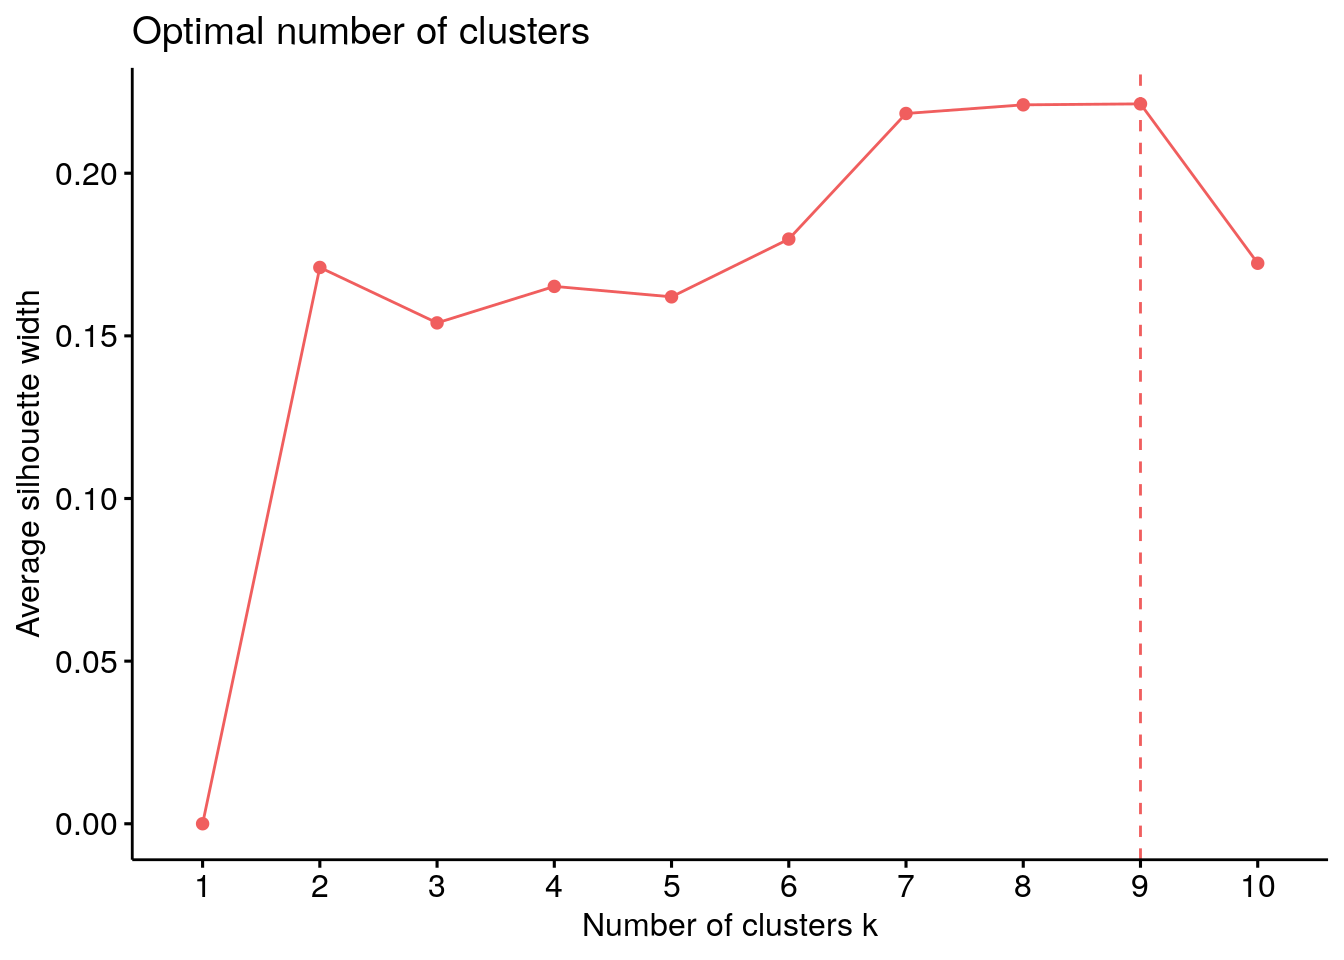 Optimal number of clusters using silhouette appraoch.